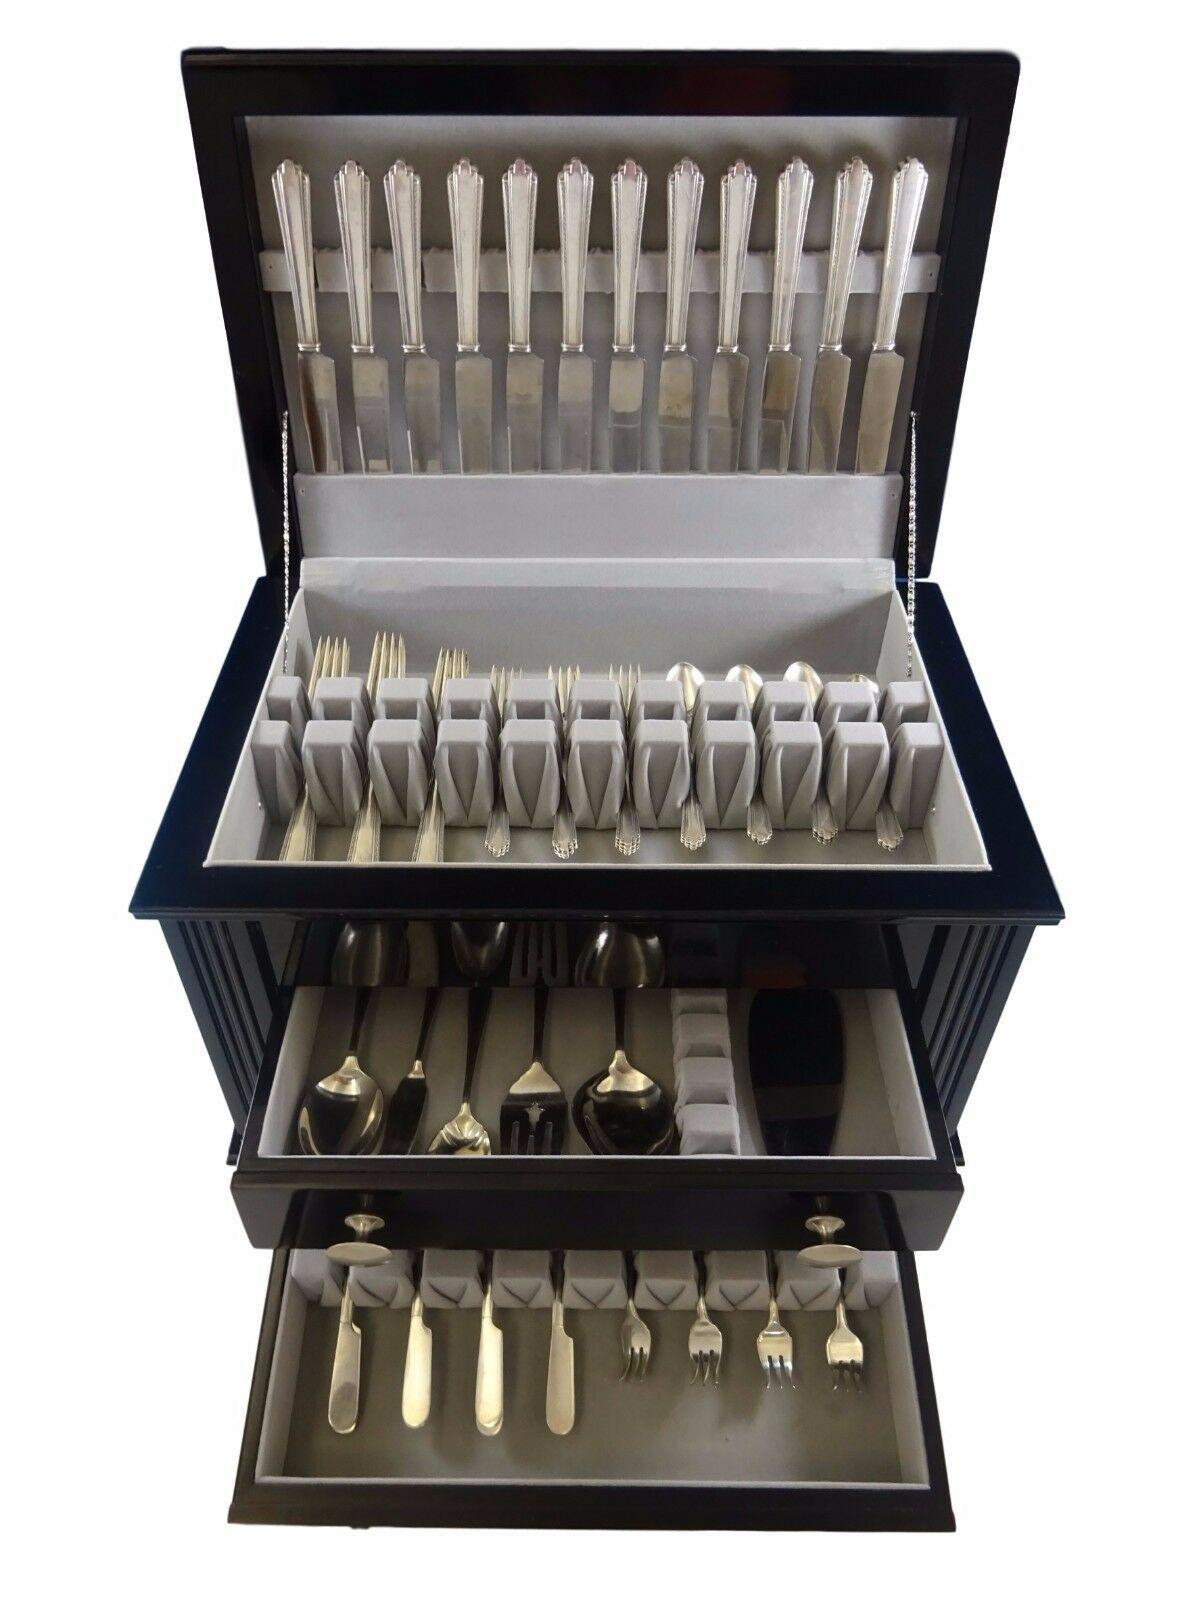 Park avenue by Manchester sterling silver flatware set - 74 pieces. This Art Deco set includes:

12 dinner size knives, 9 3/4